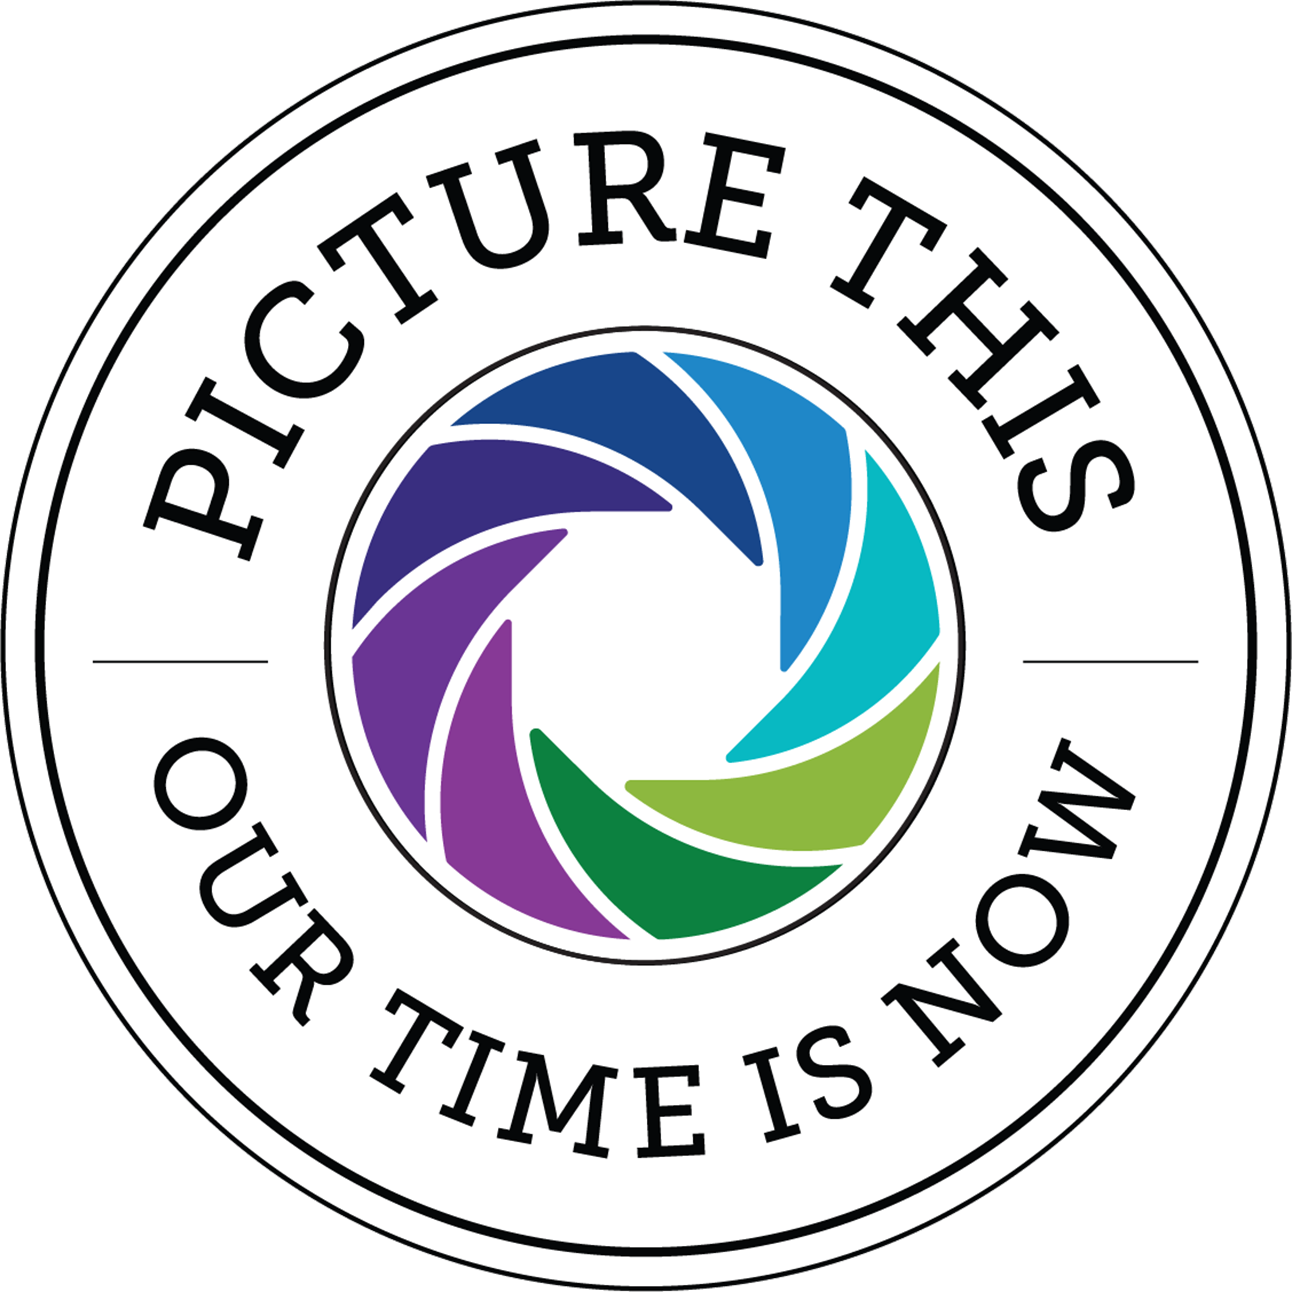 Picture This Logo